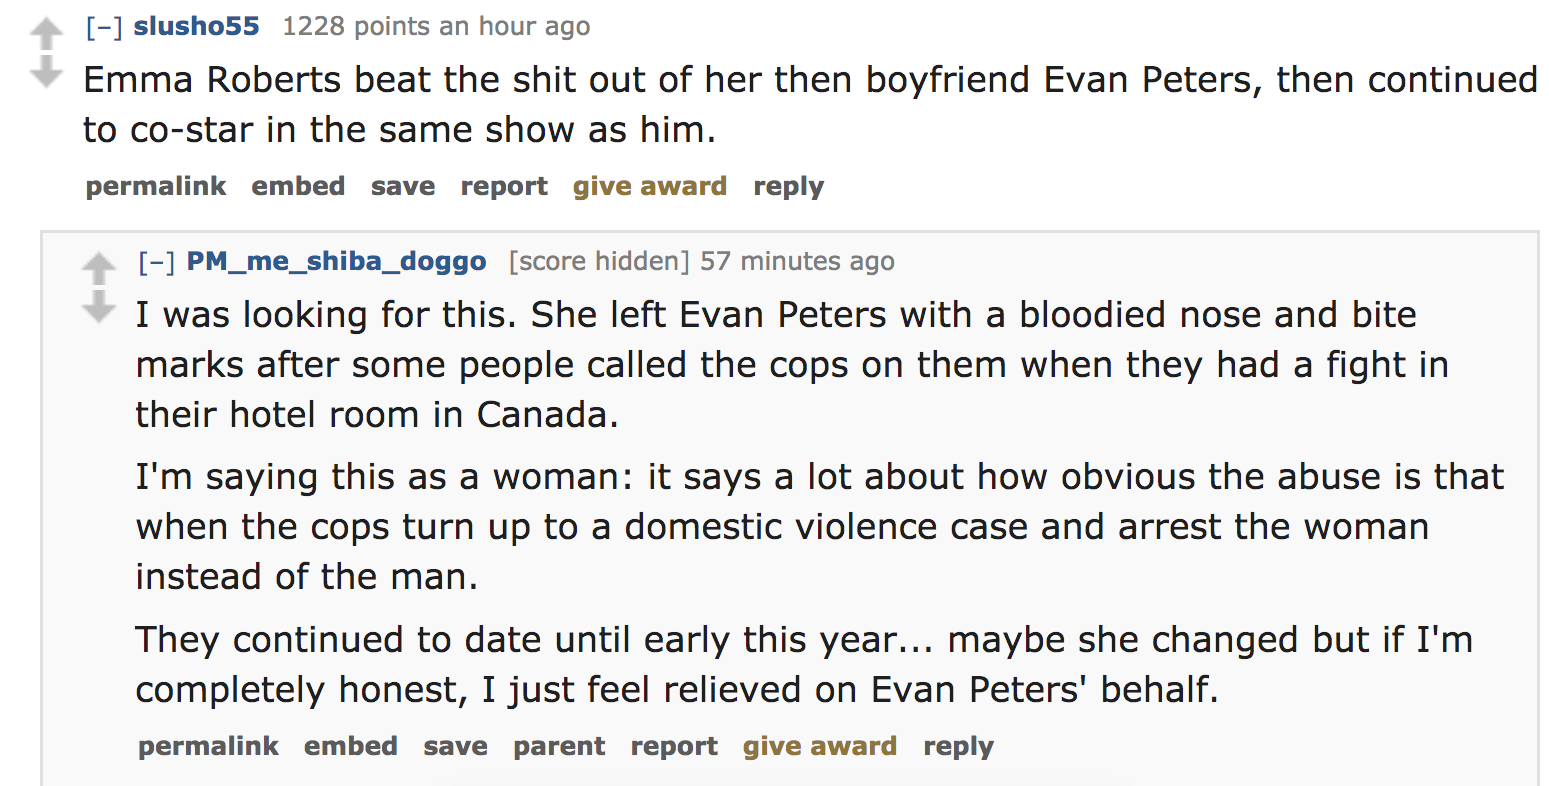 celebrity crimes - Emma Roberts beat the shit out of her then boyfriend Evan Peters, then continued to costar in the same show as him. permalink embed save report give award PM_me_shiba_doggo score hidden 57 minutes ago I was looking